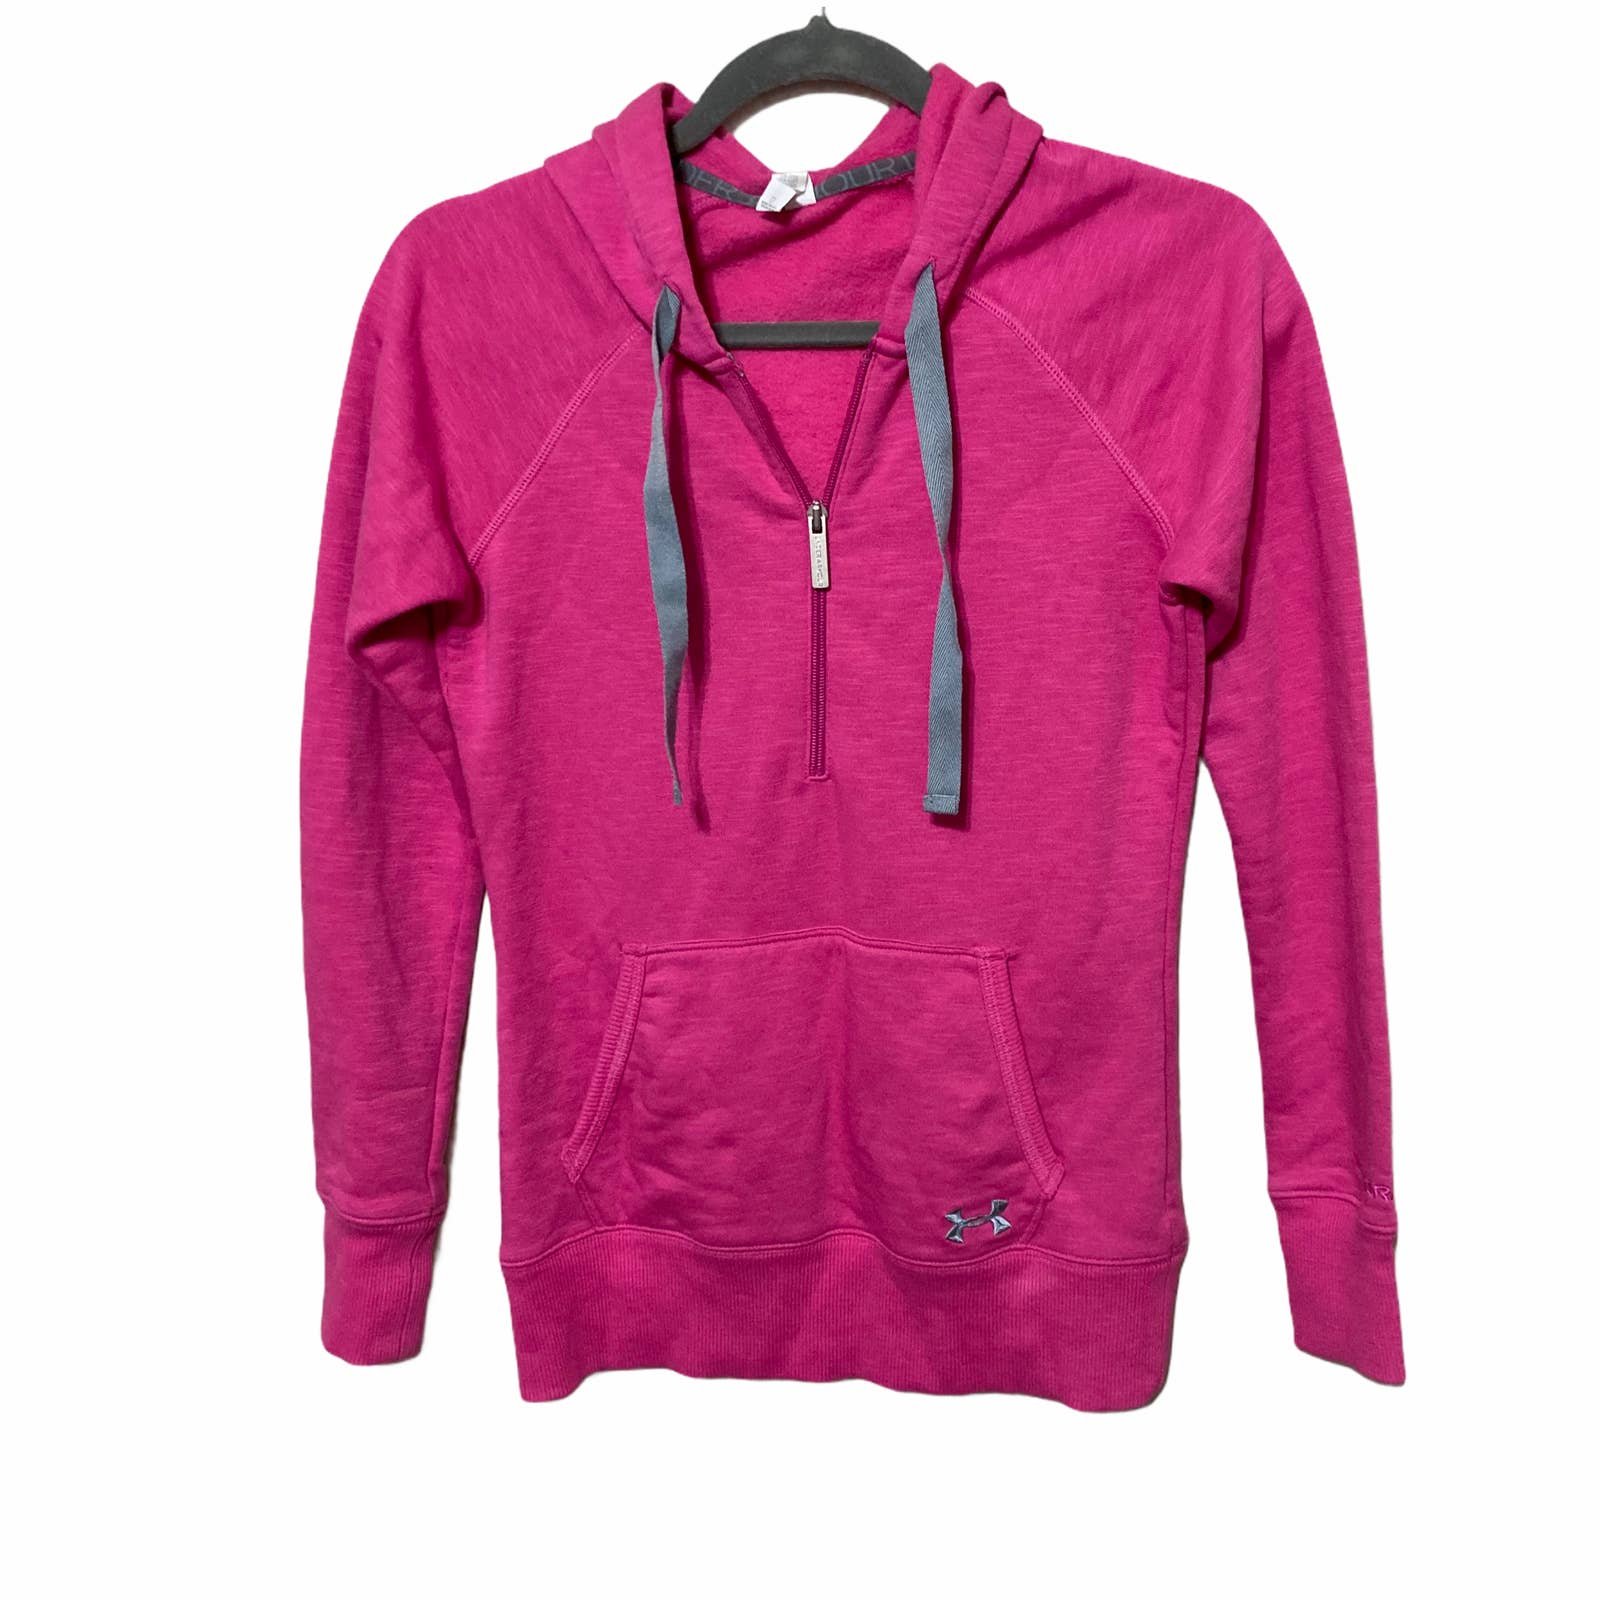 Wholesale price Under Armour Semi Fitted Hoodie XS Pink